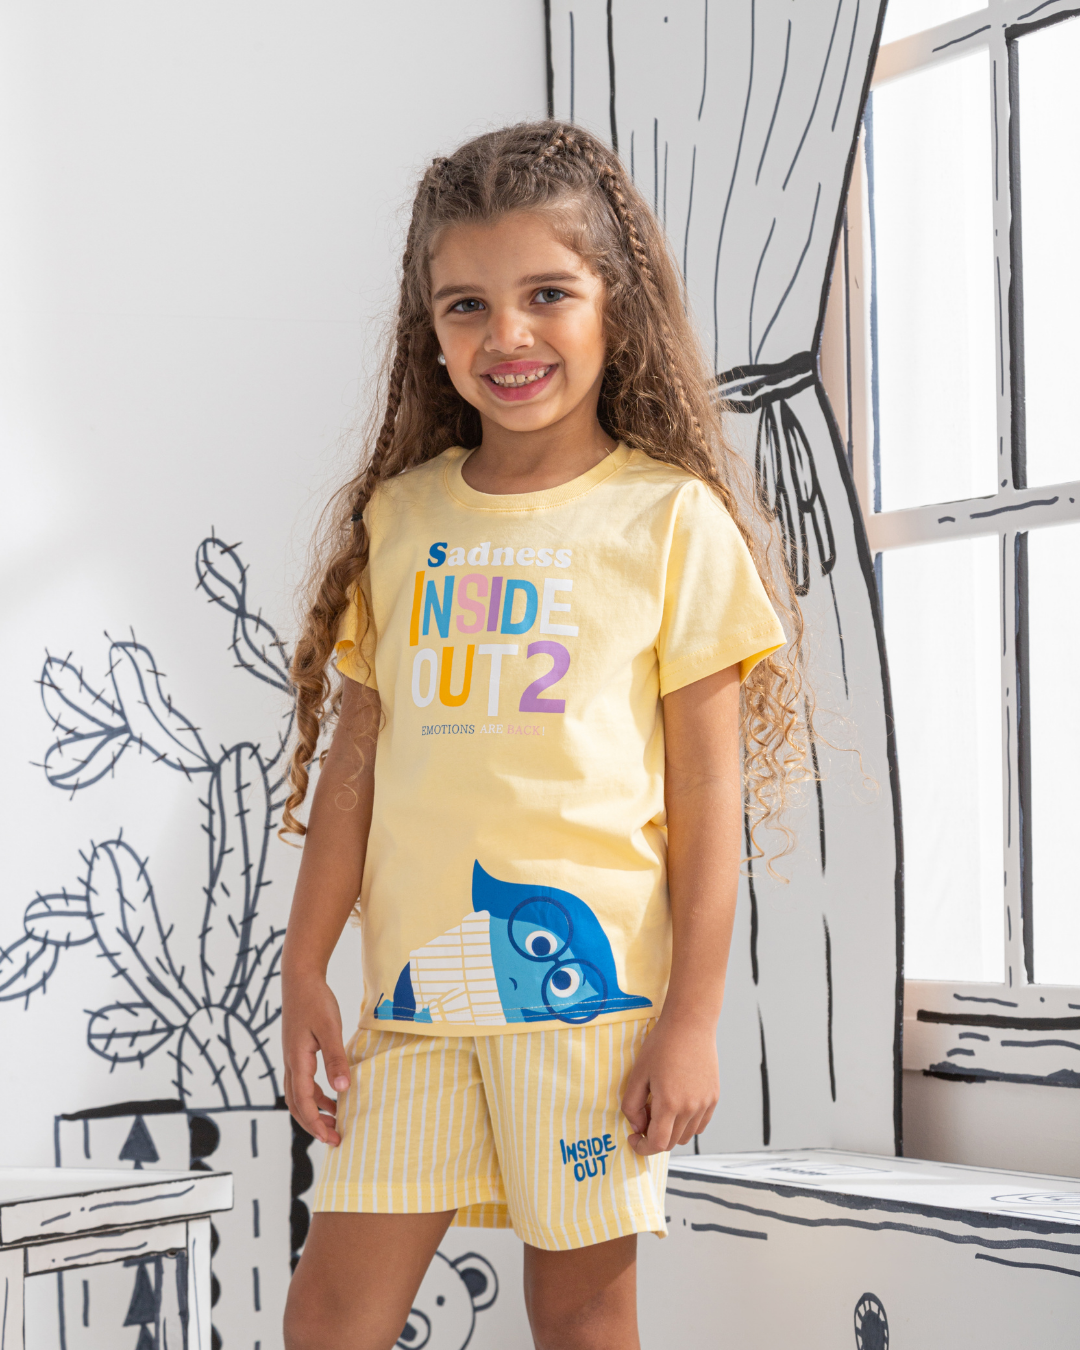 Sadness Inside out My children's girls' pajamas, half sleeves and shorts